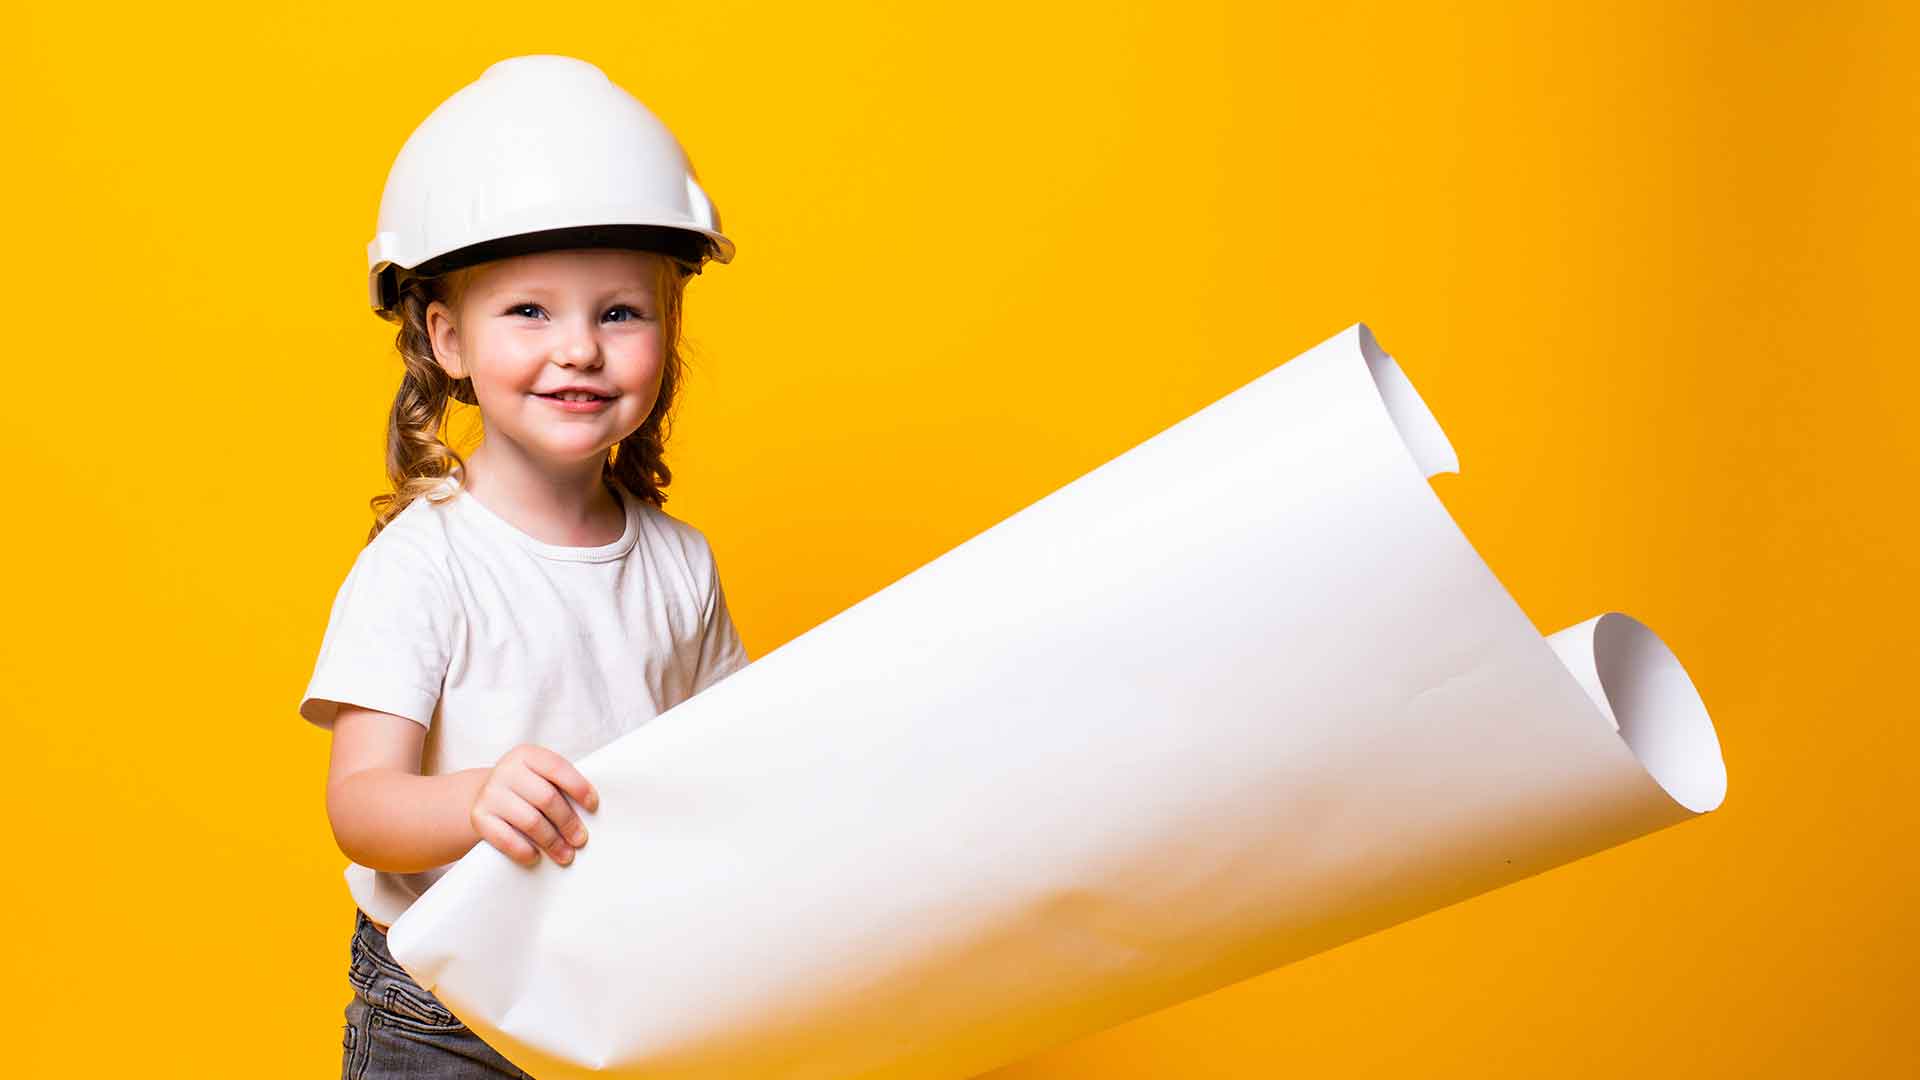 Home Fix-It Projects To Do With Your Kids